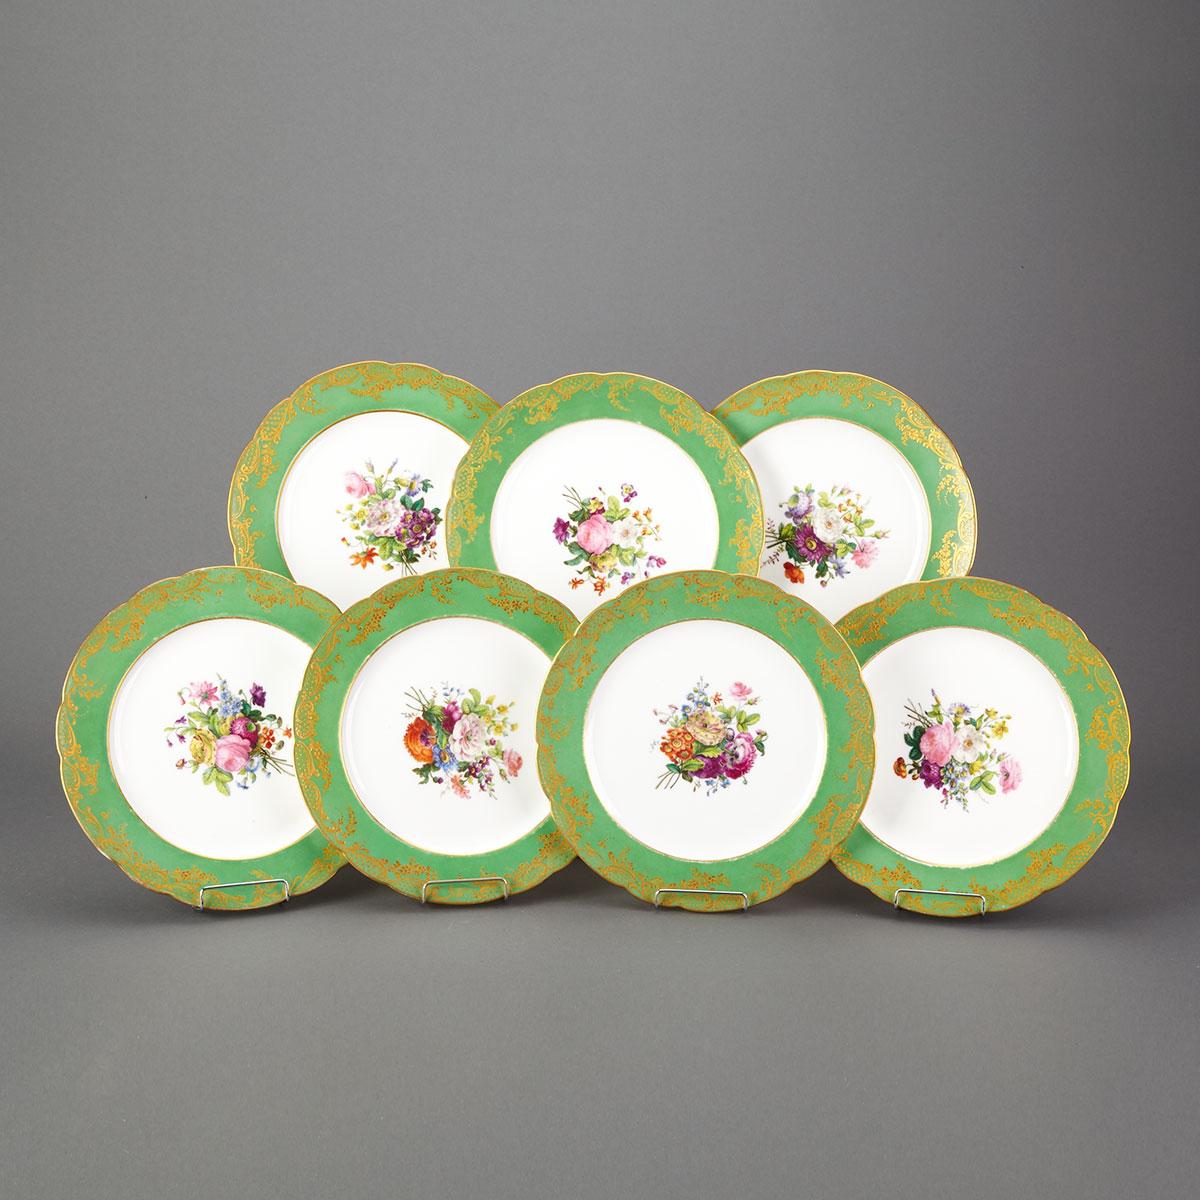 Seven Feuillet, Paris Porcelain Apple Green and Gilt Banded Plates, mid-19th century